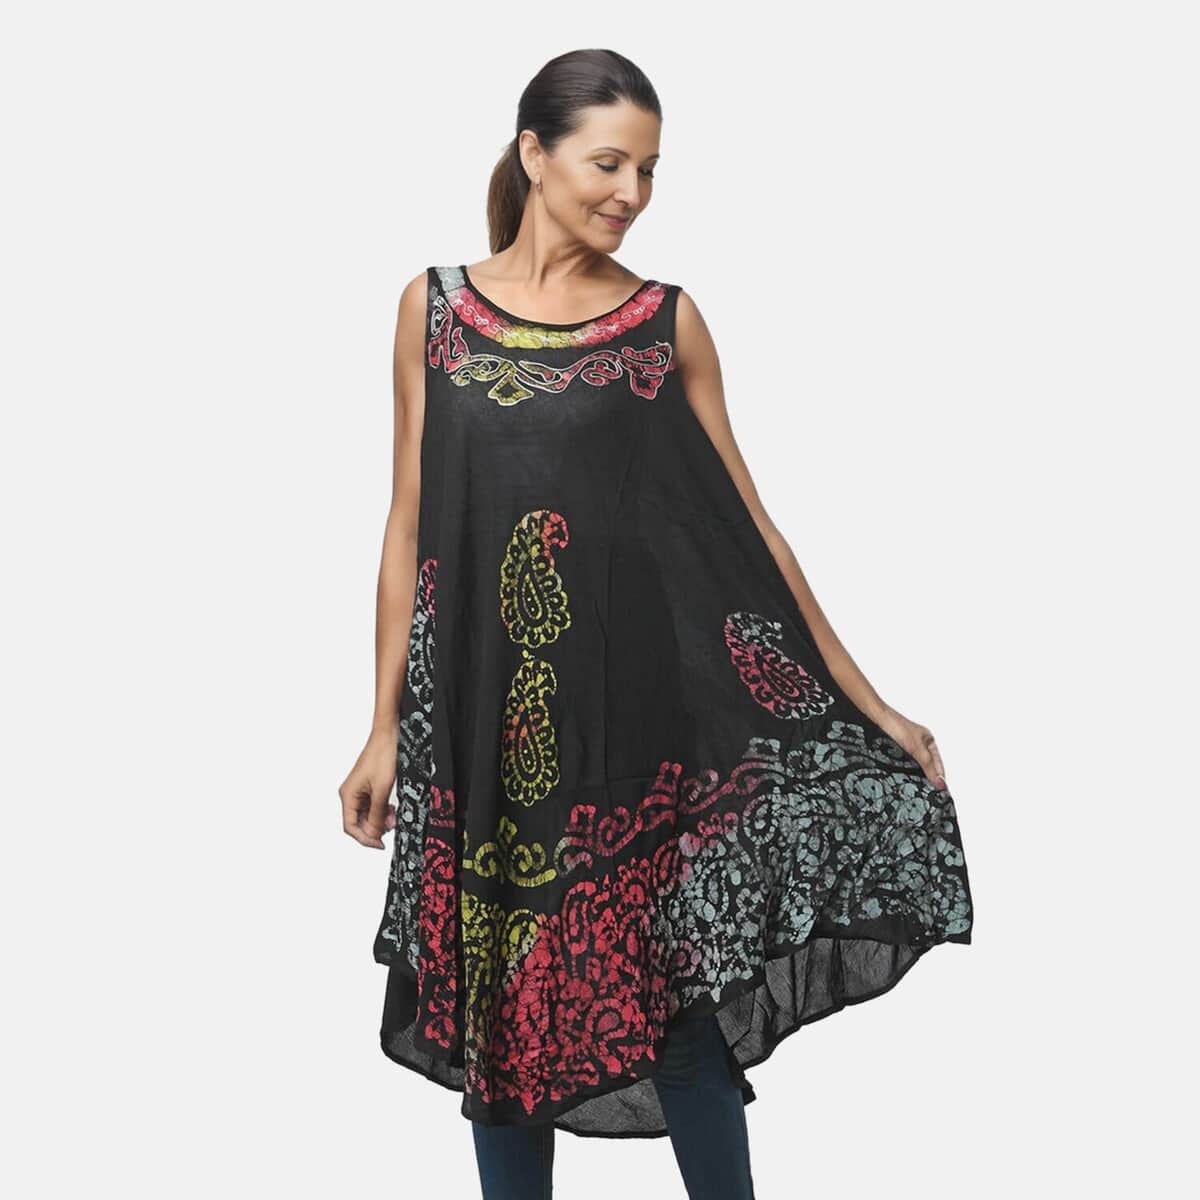 Tamsy Rainbow and Black Butterfly Print Umbrella Dress - One Size Fits Most (48"x44") image number 2